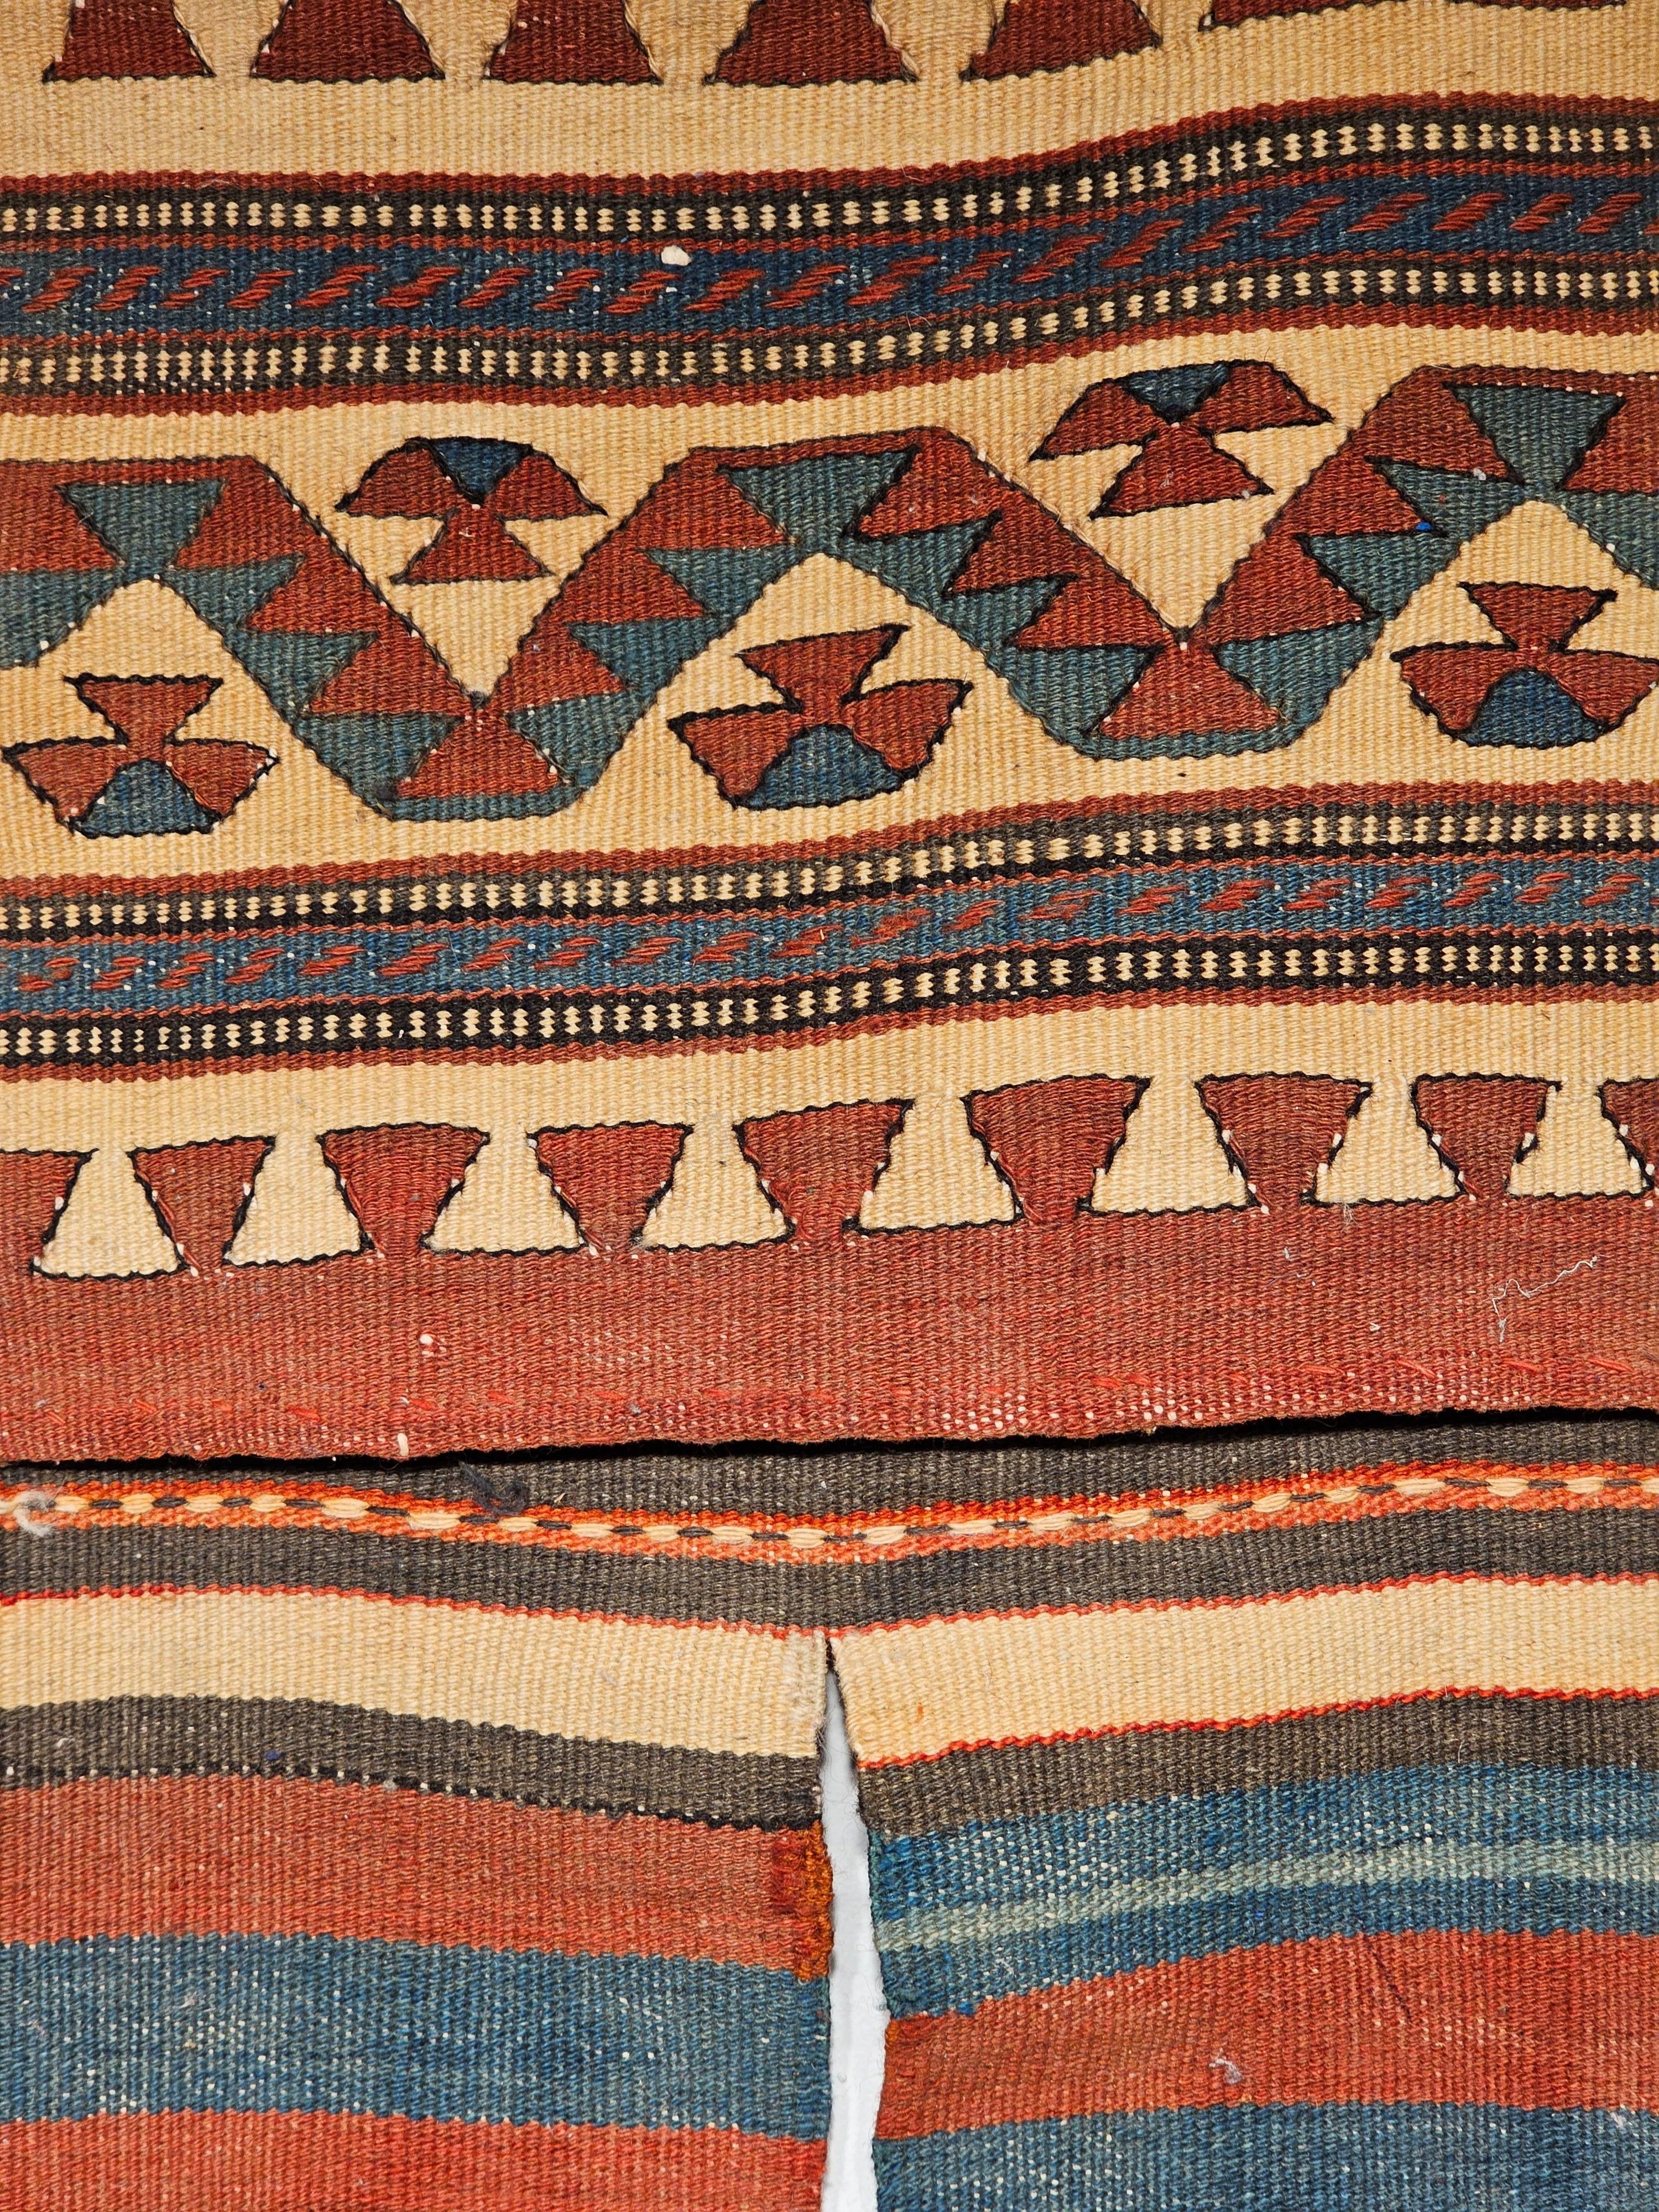 Beautiful and very rare Uzbek Double Kilim Saddlebags from the early 20th century.  The bag faces have geometric designs in indigo blue, brown, rust red and pale yellow similar to the design of bags from Caucasus or the Shahsavan Tribes of  NW